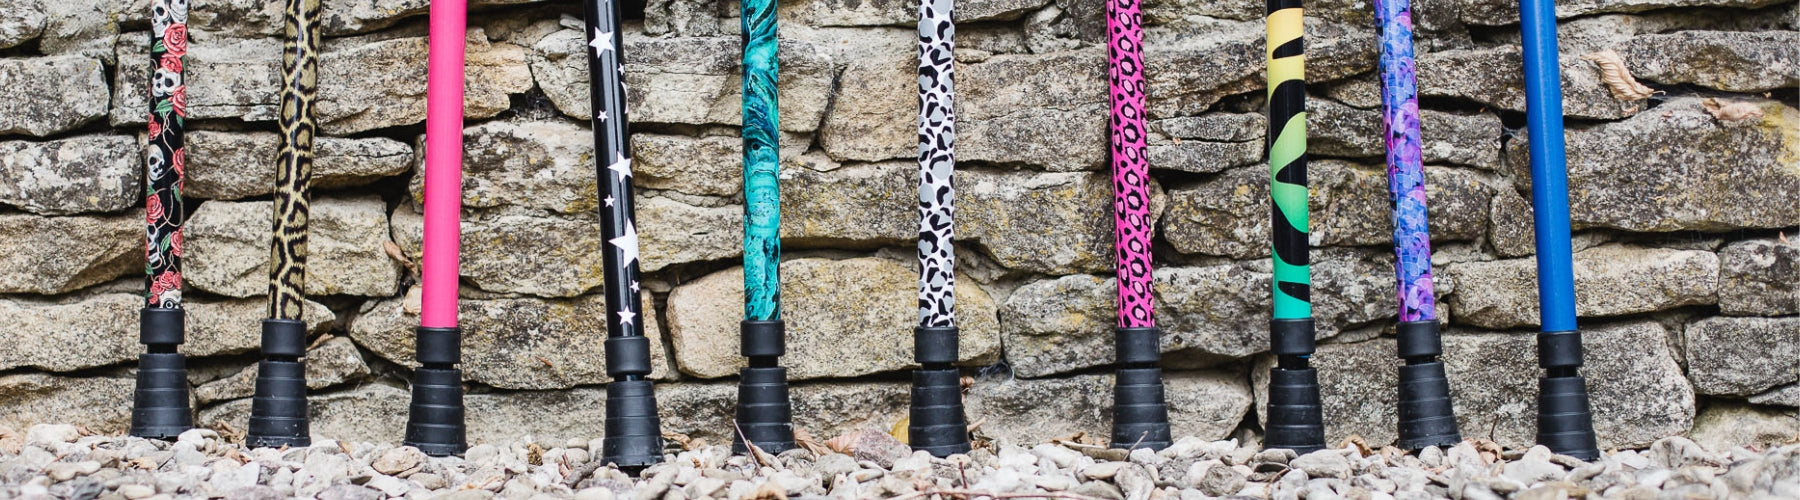 5 Reasons to Choose Cool Crutches